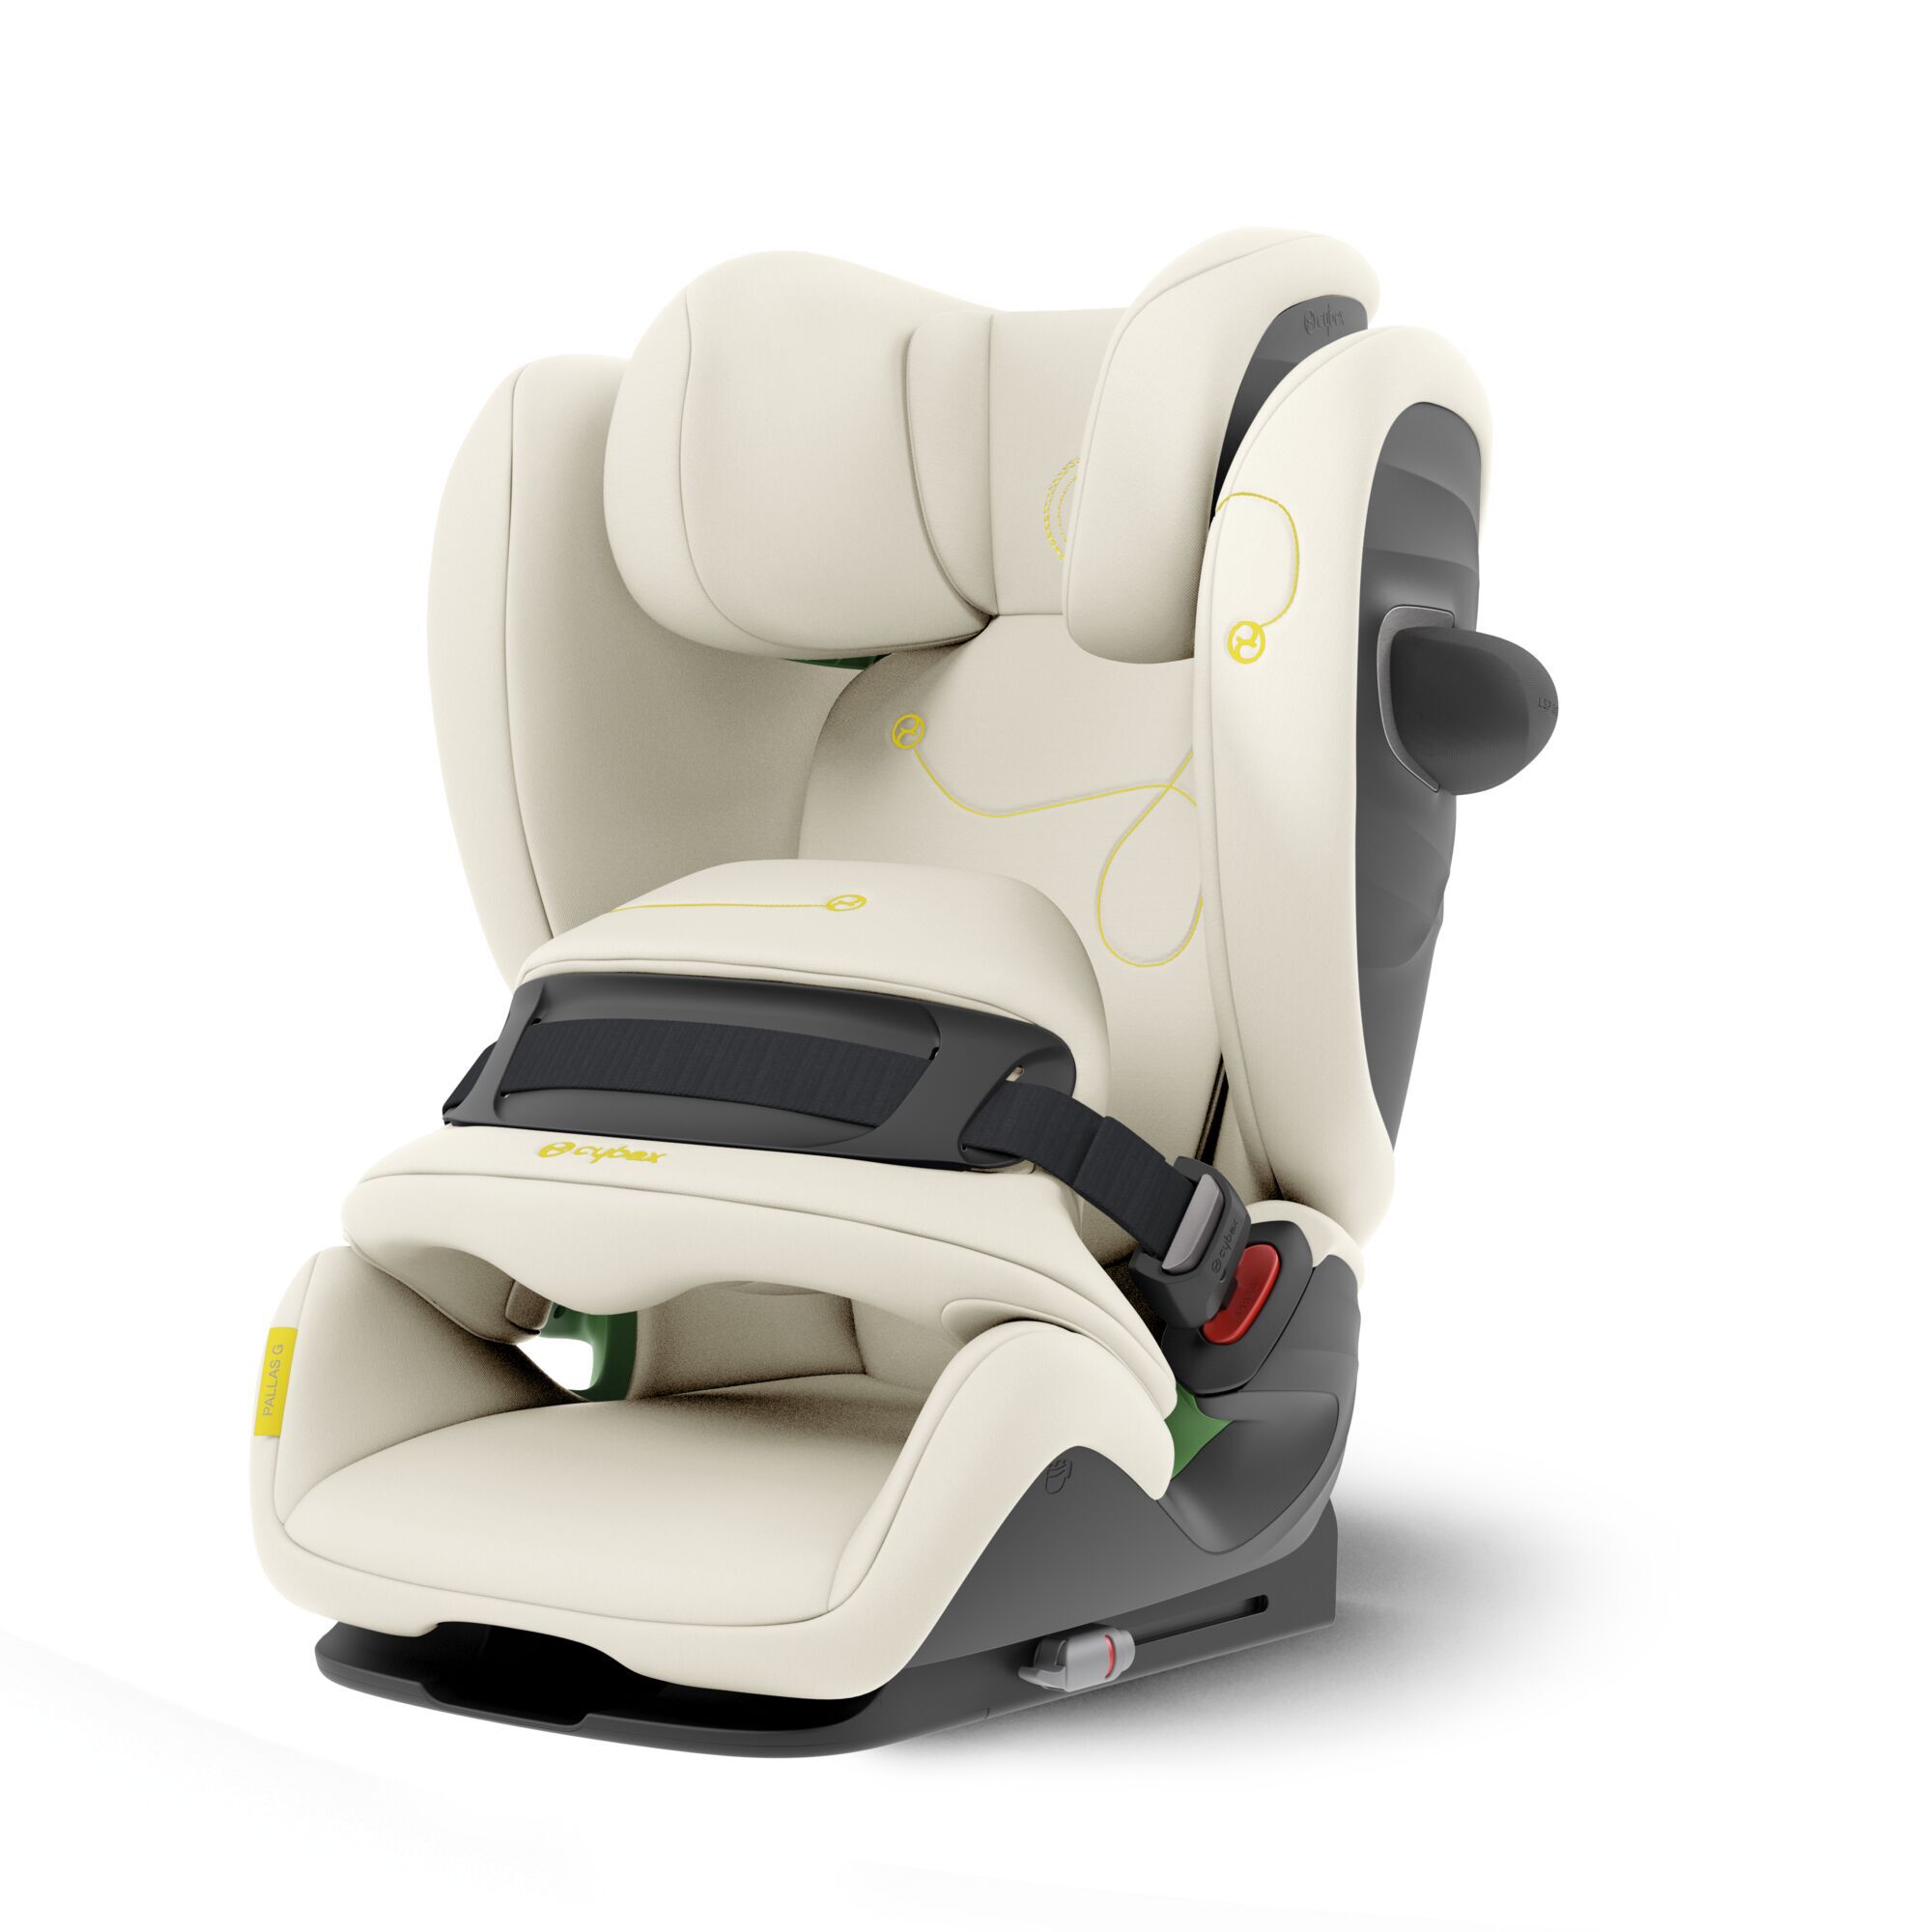 Cybex Pallas G i-Size Car Seat Plus - Hibiscus Red